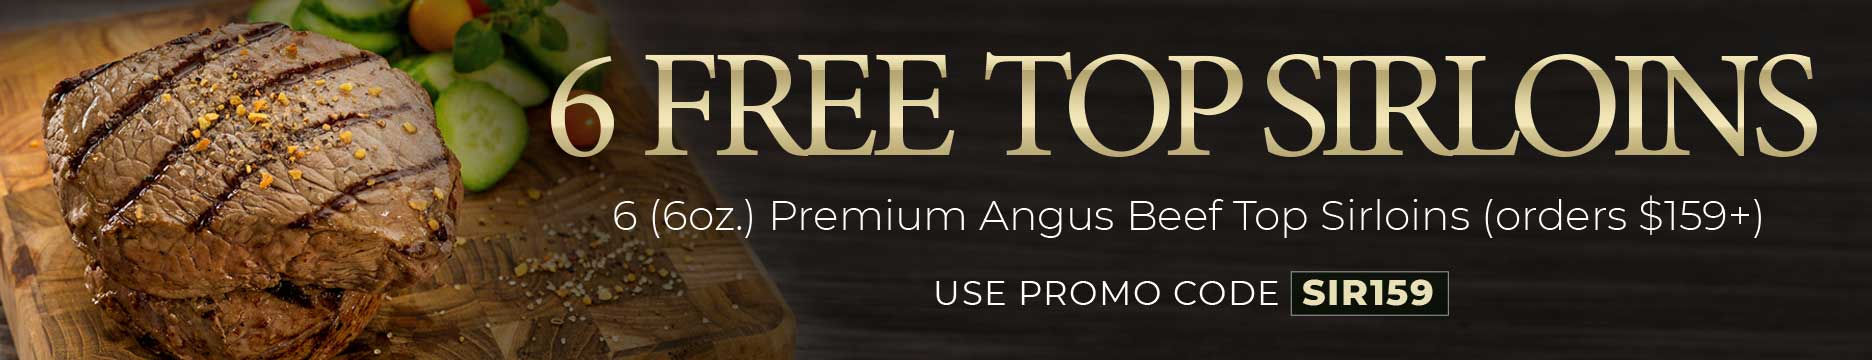 Receive 6 FREE Top Sirloins on you order of $159+. Use Promo code: SIR159